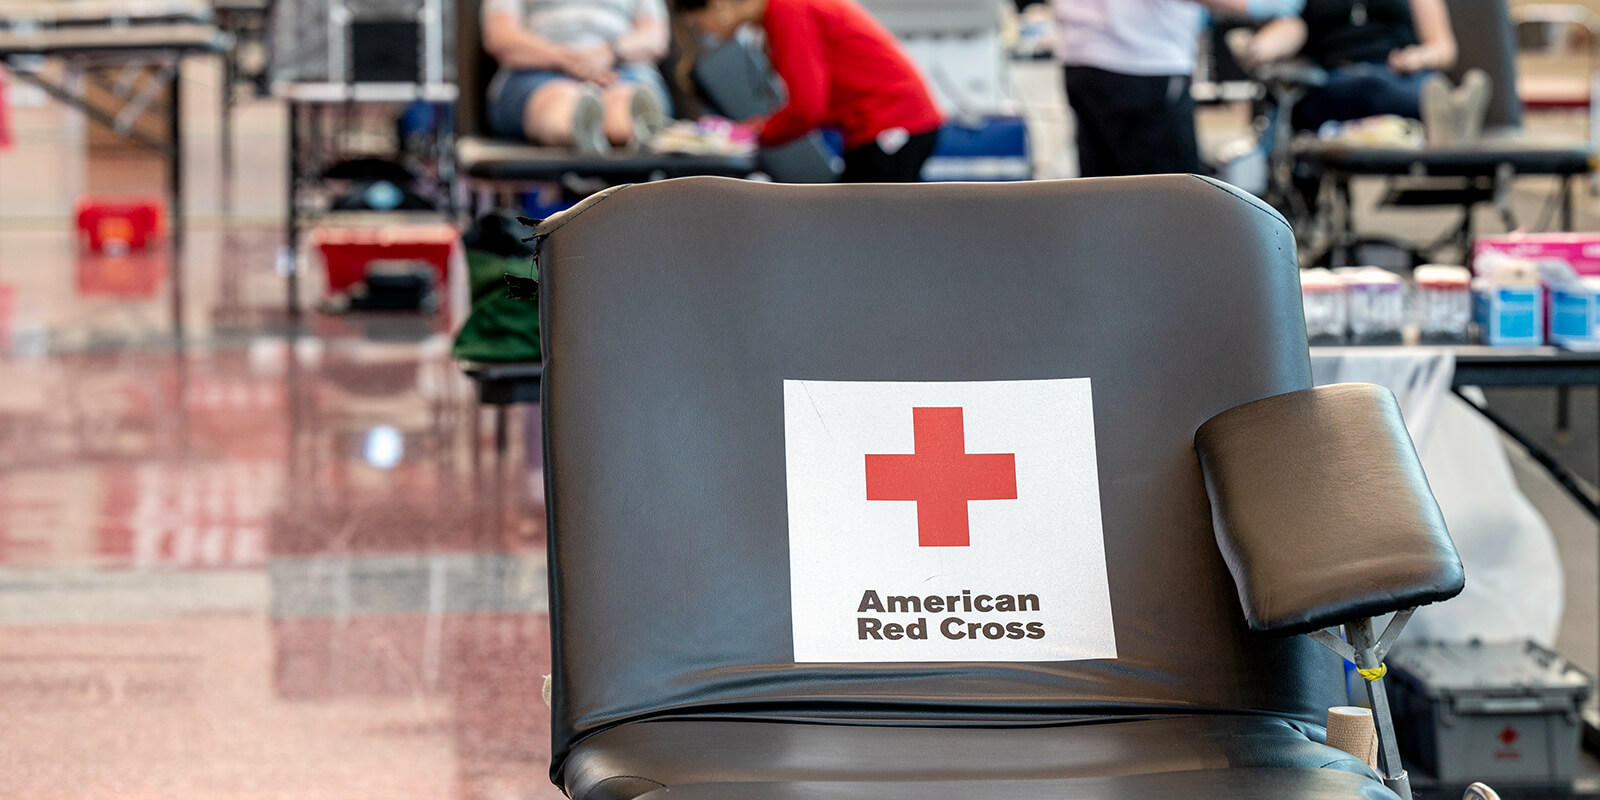 AFSCME supports American Red Cross workers as they struggle for fair treatment and respect | American Federation State, County and Municipal Employees (AFSCME)